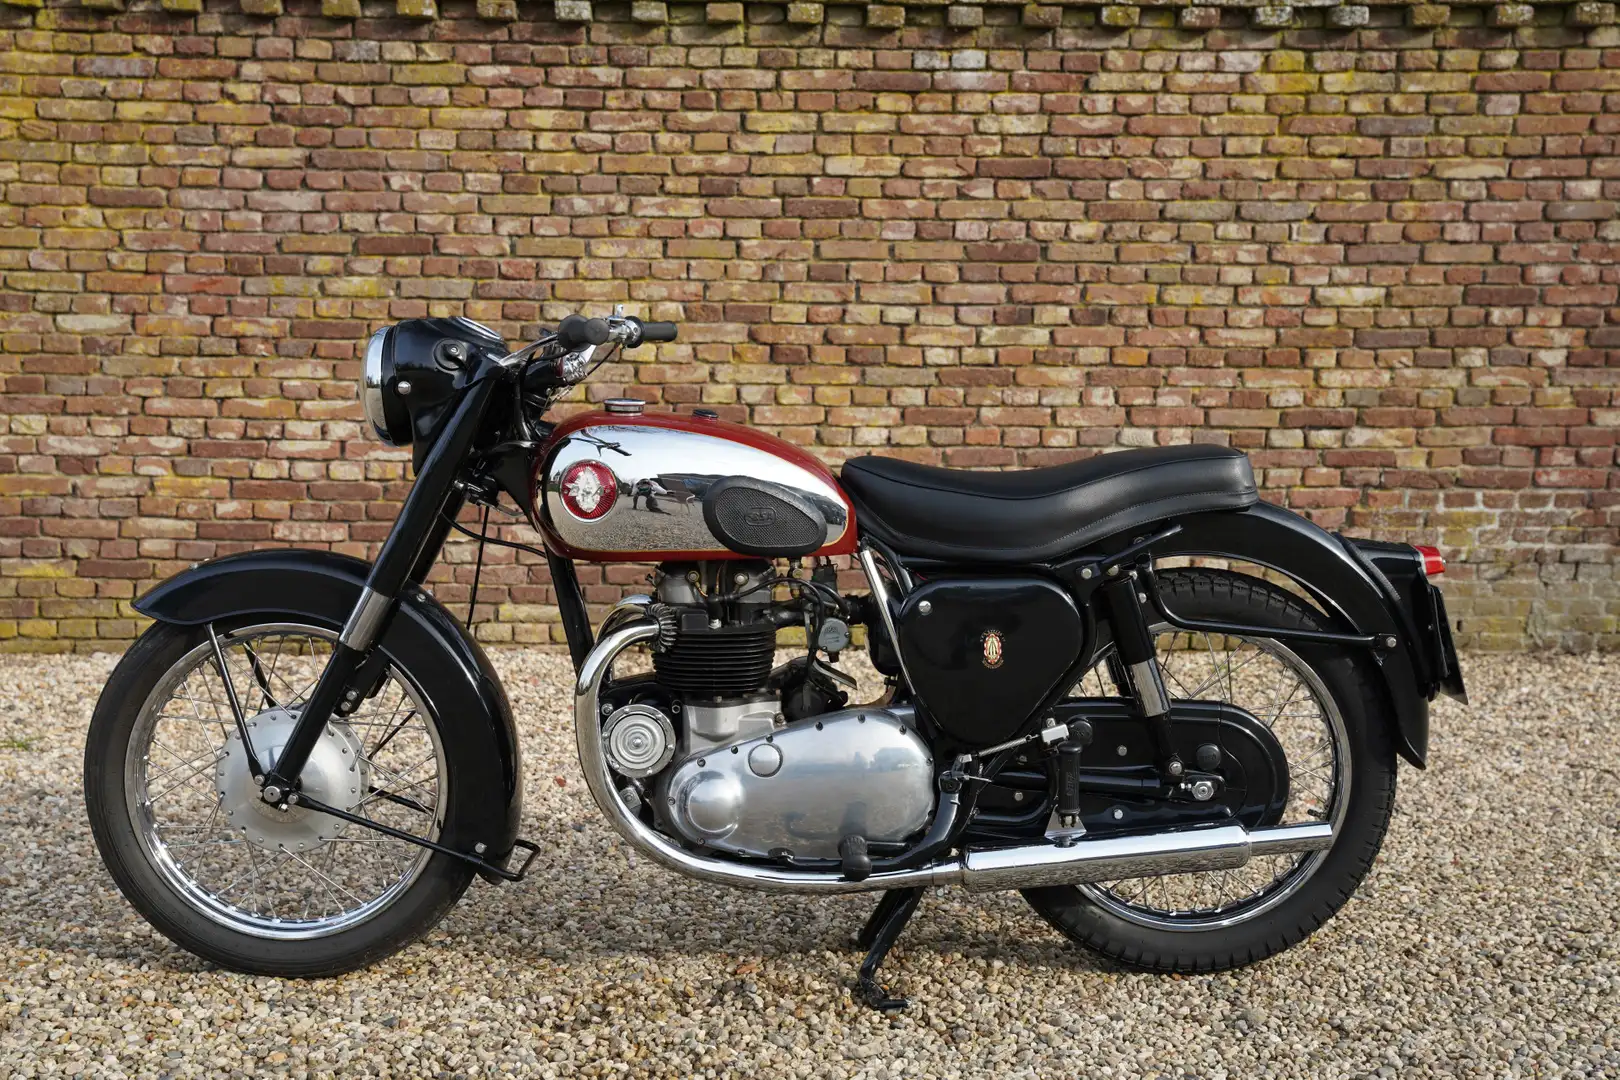 BSA A 7 Restored to a very good standard, A great looking Black - 1